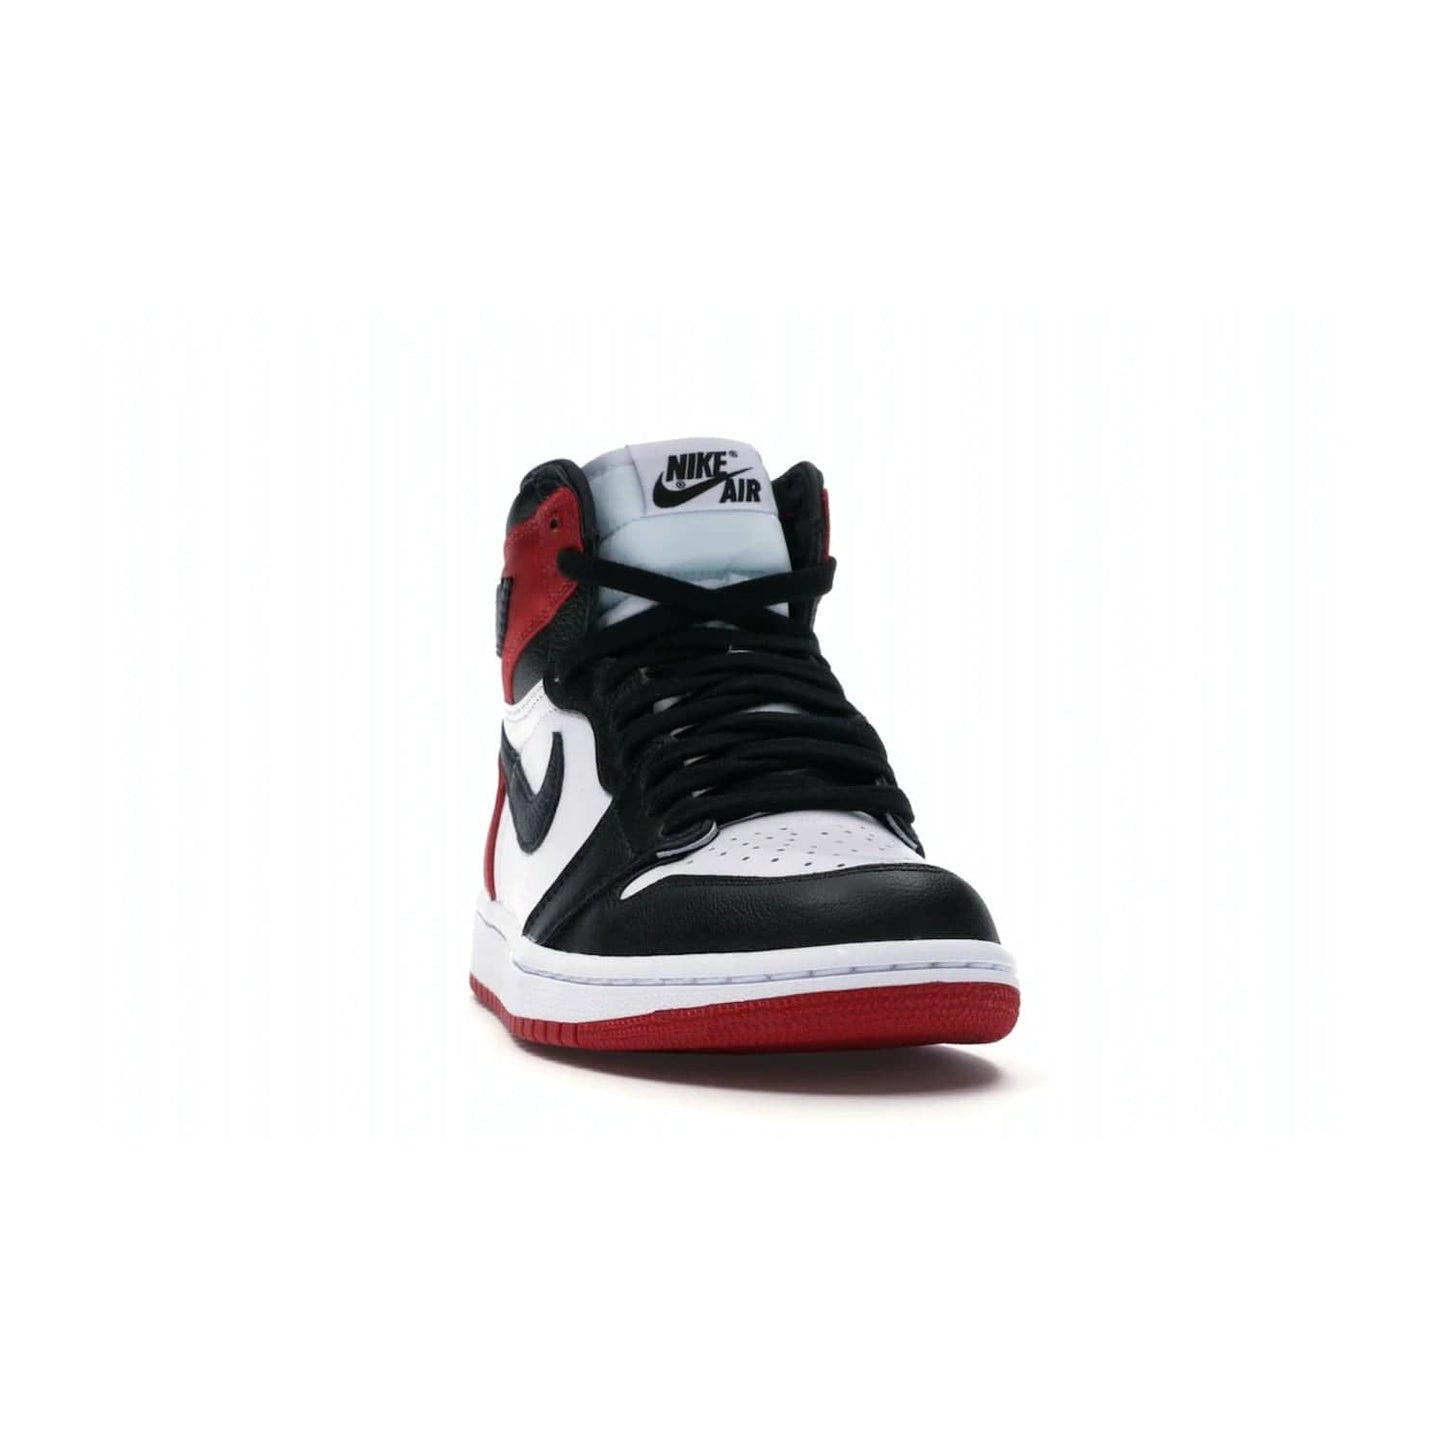 Jordan 1 Retro High Satin Black Toe (Women's) - Image 8 - Only at www.BallersClubKickz.com - Luxurious take on the timeless Air Jordan 1. Features a mix of black leather and satin materials with subtle University Red accents. Elevated look with metal Wings logo on the heel. Released in August 2019.